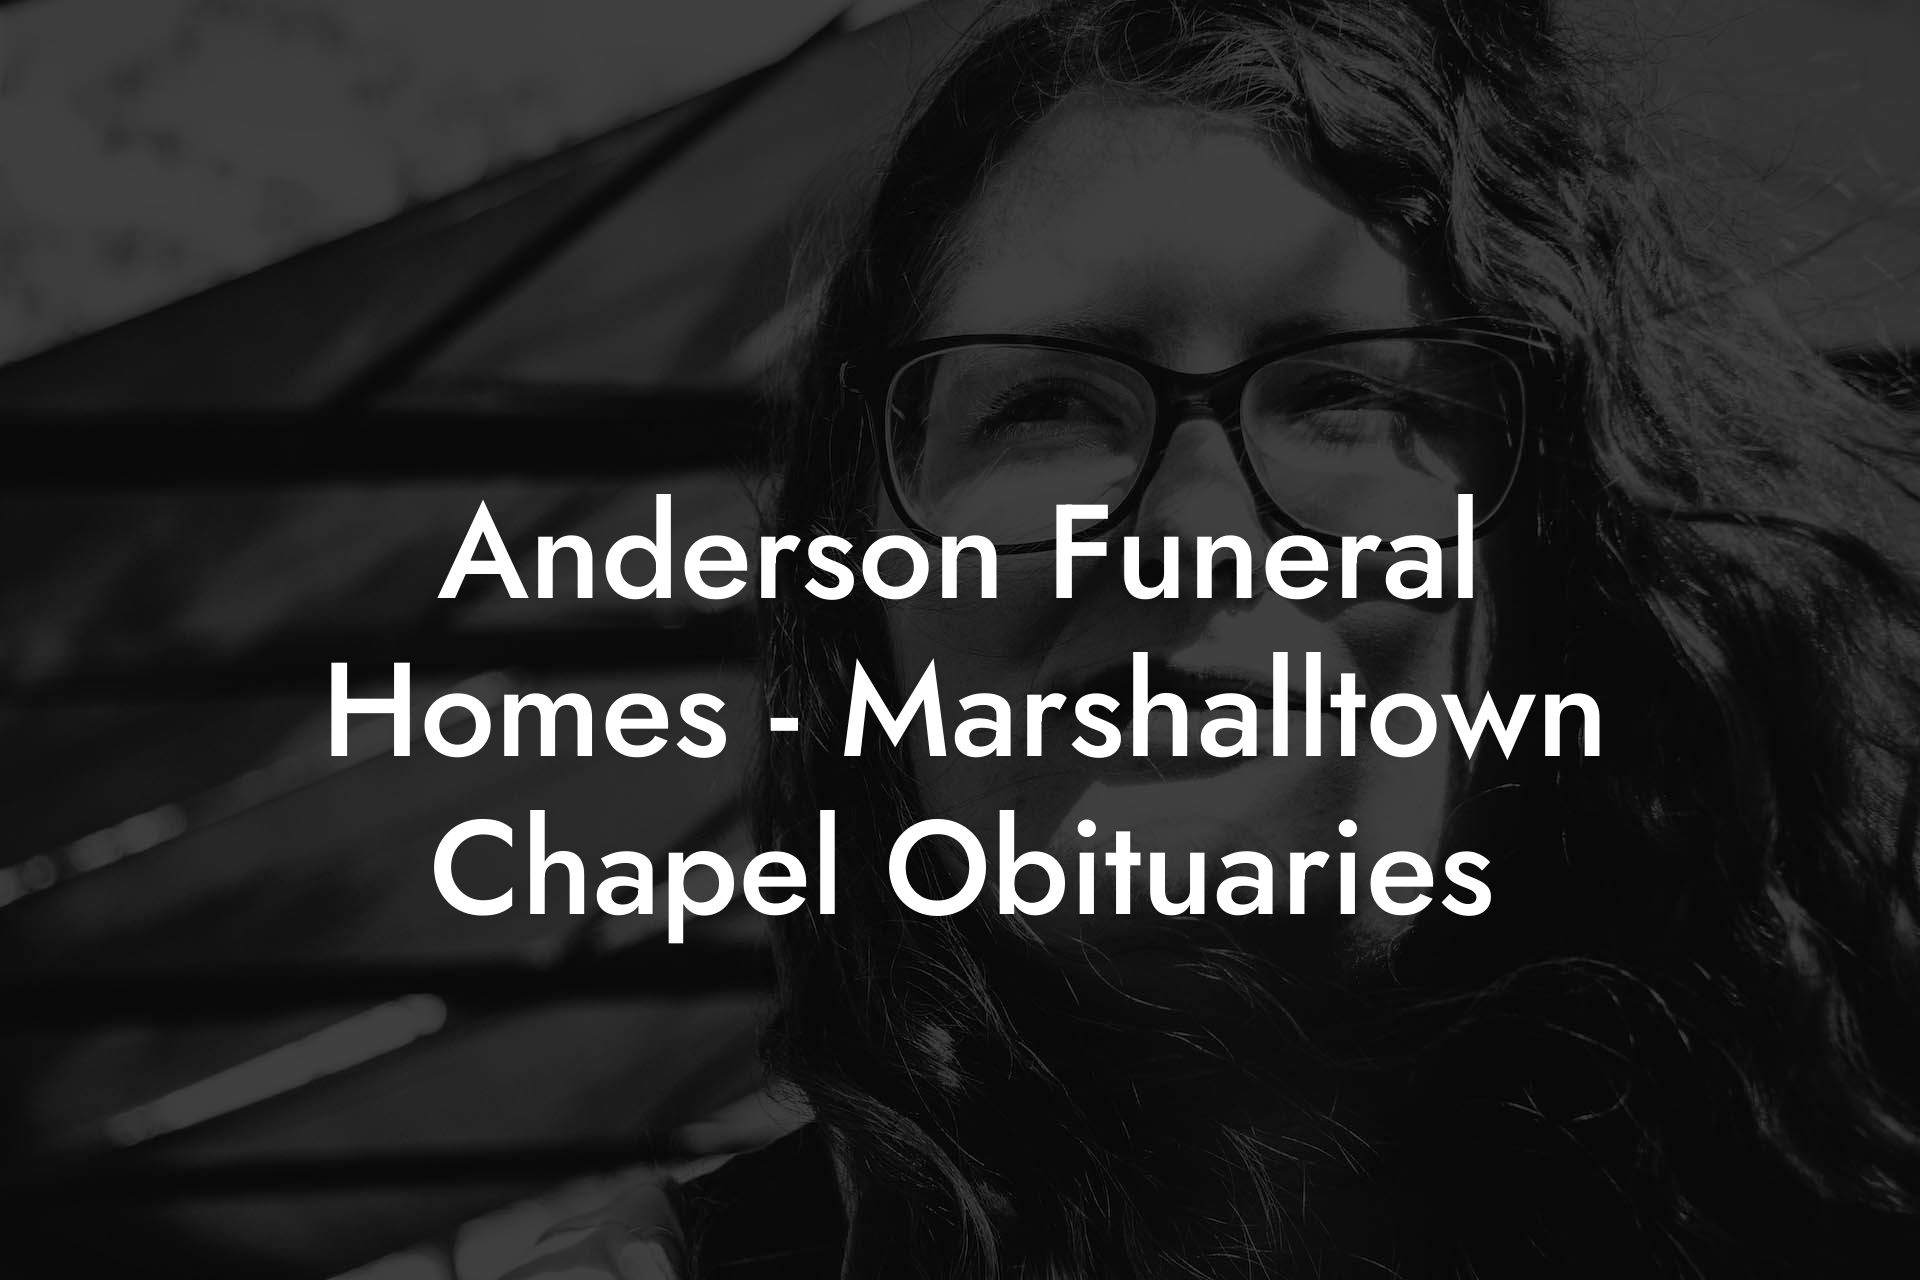 Anderson Funeral Homes - Marshalltown Chapel Obituaries